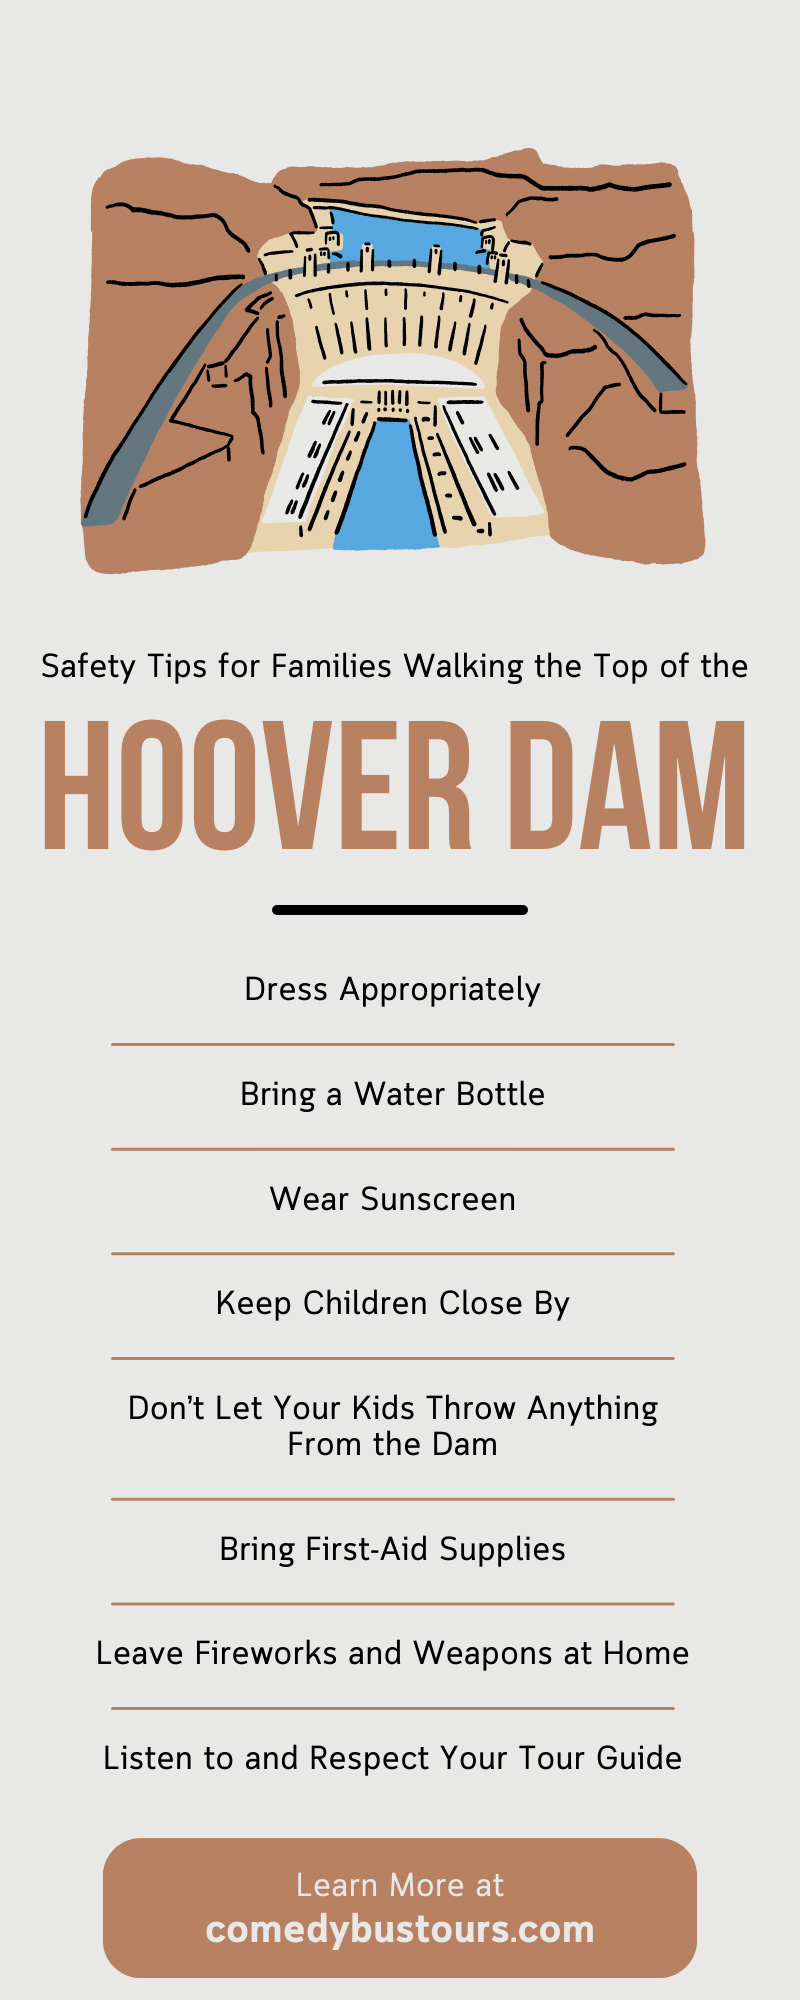 Safety Tips for Families Walking the Top of the Hoover Dam